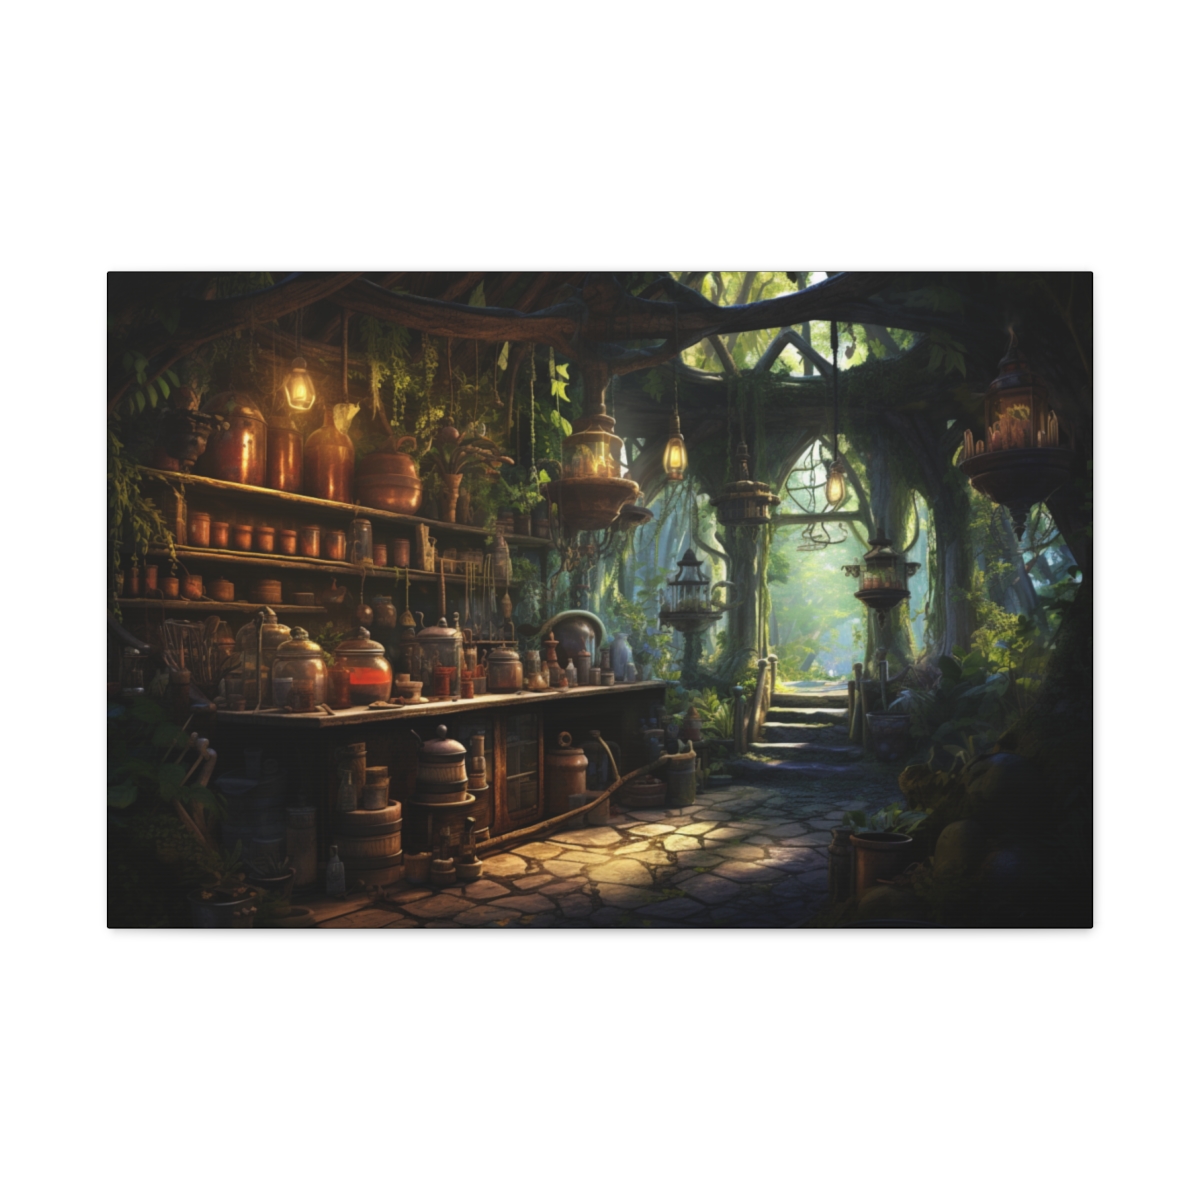 Forest Wall Art Canvas Print: Guidance From The Sun